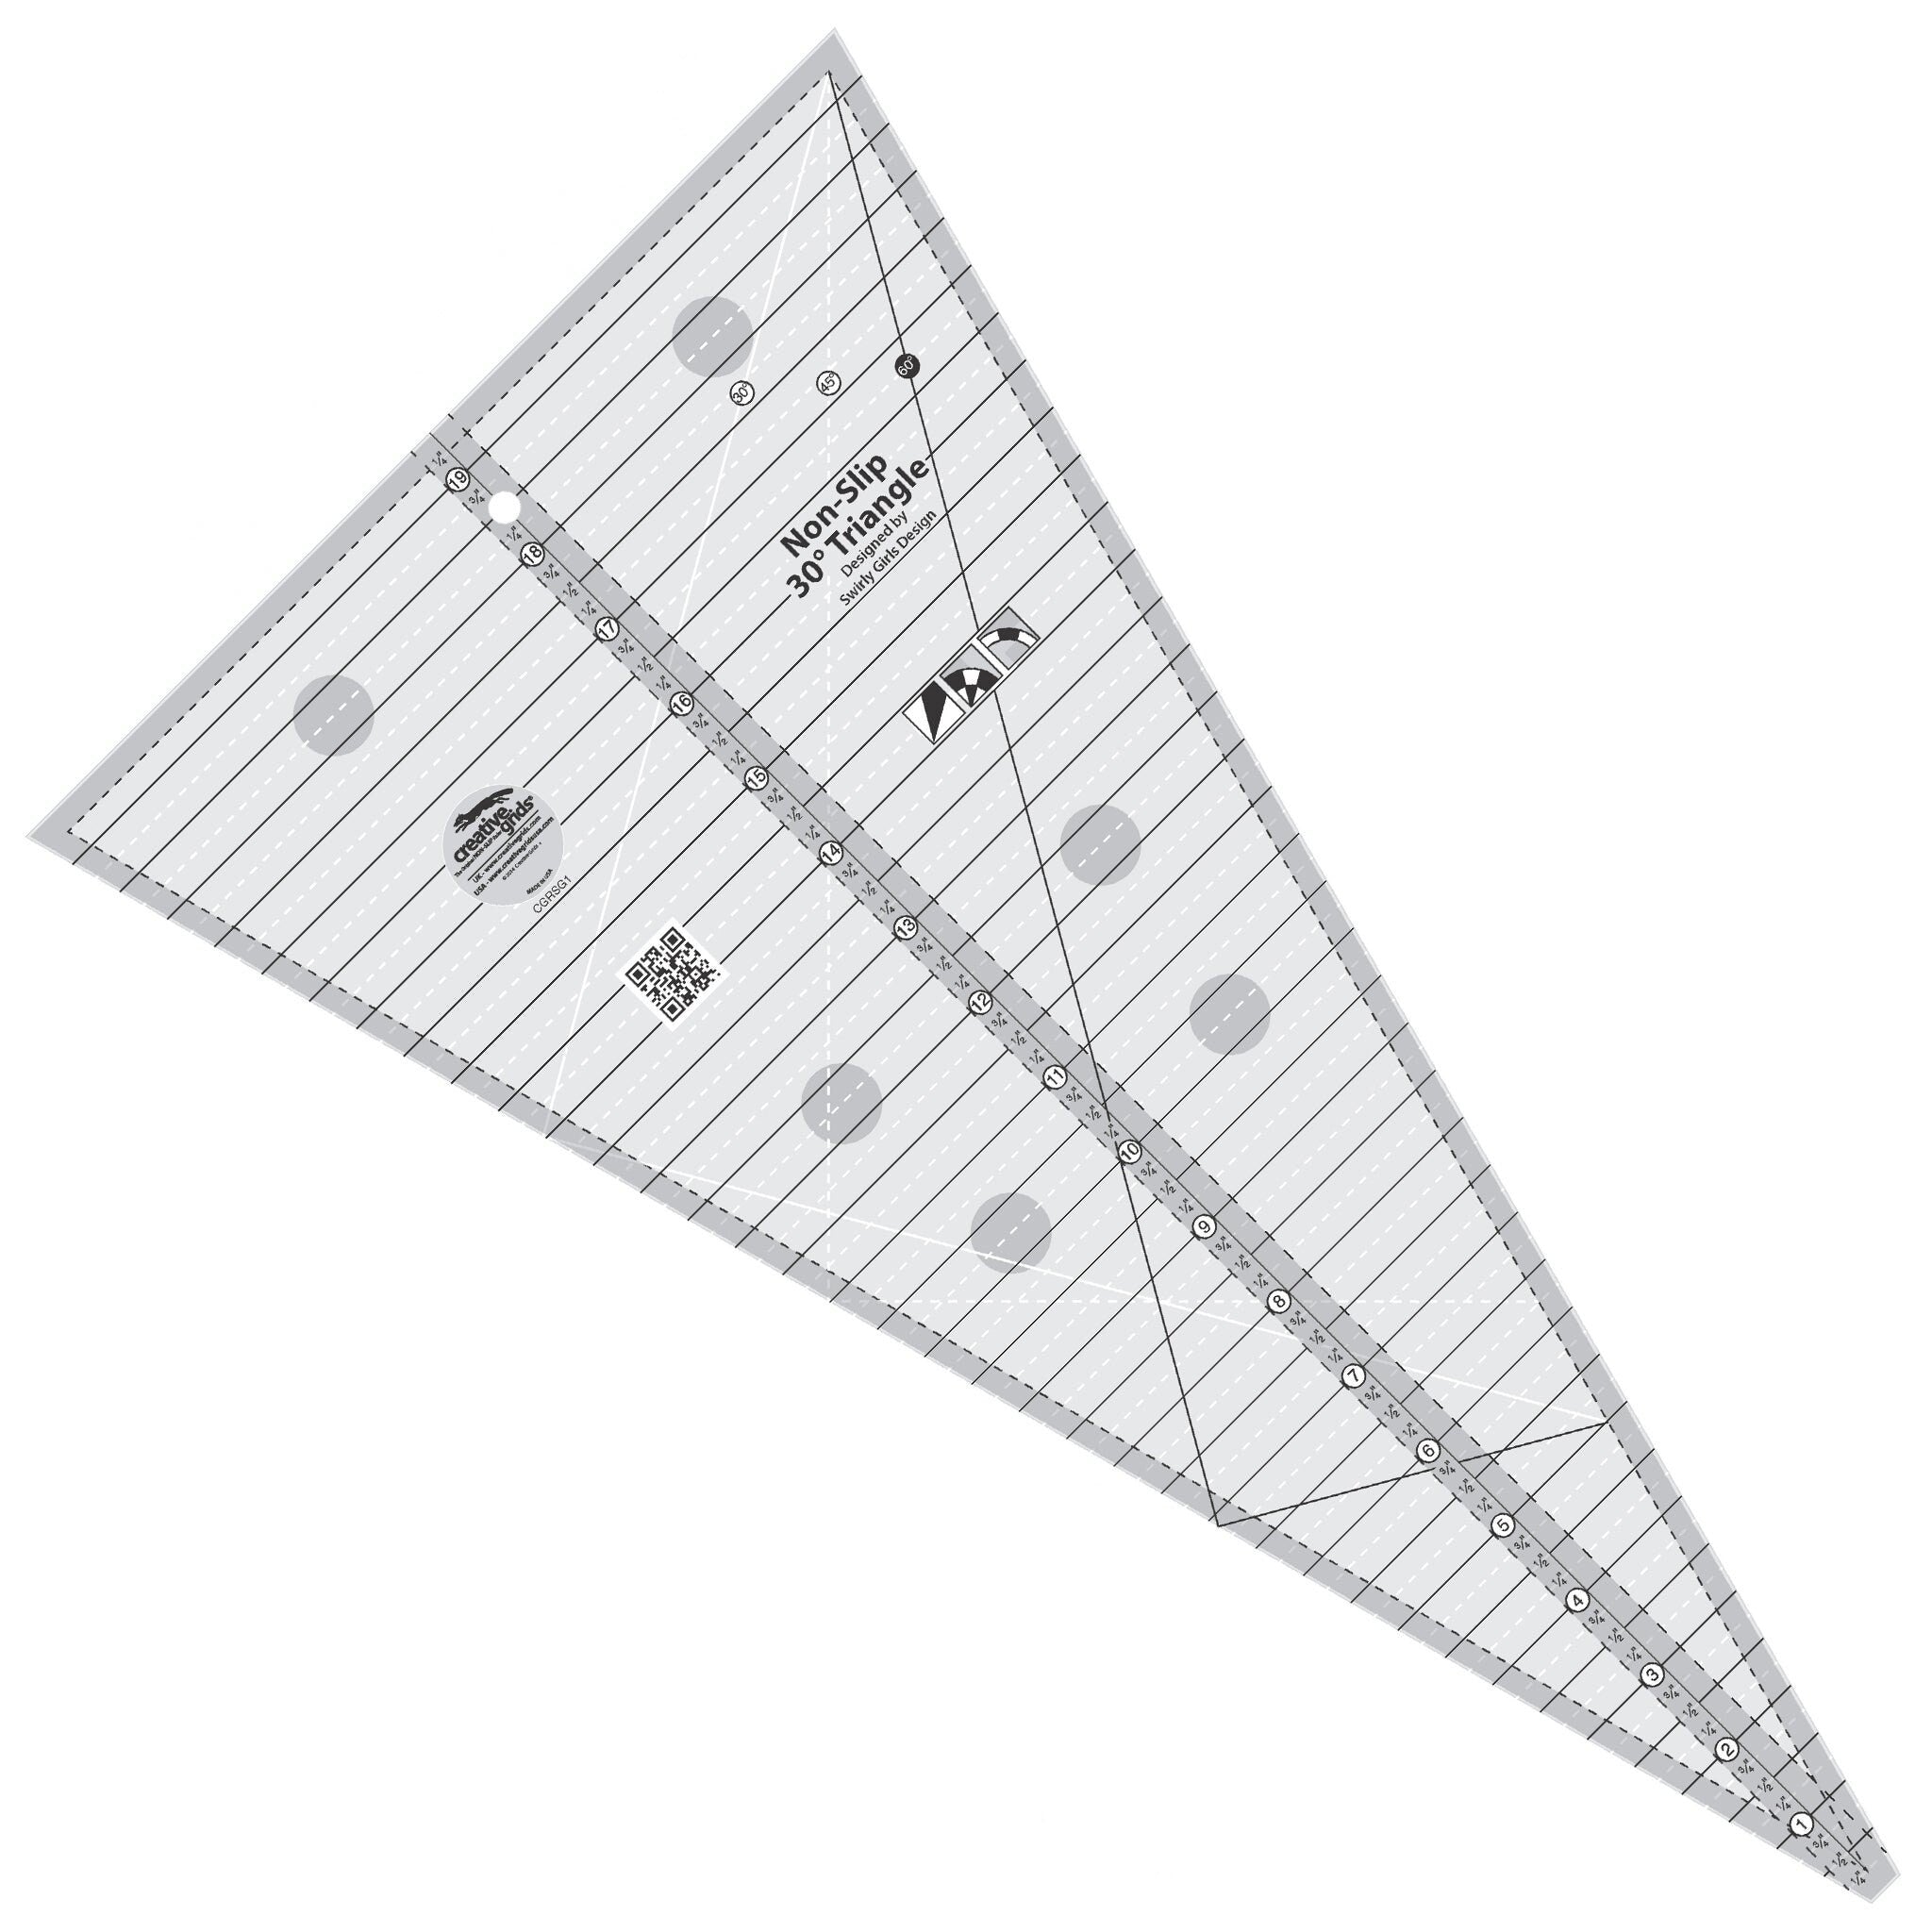 Quilter's Select 60 Degree Triangle Ruler